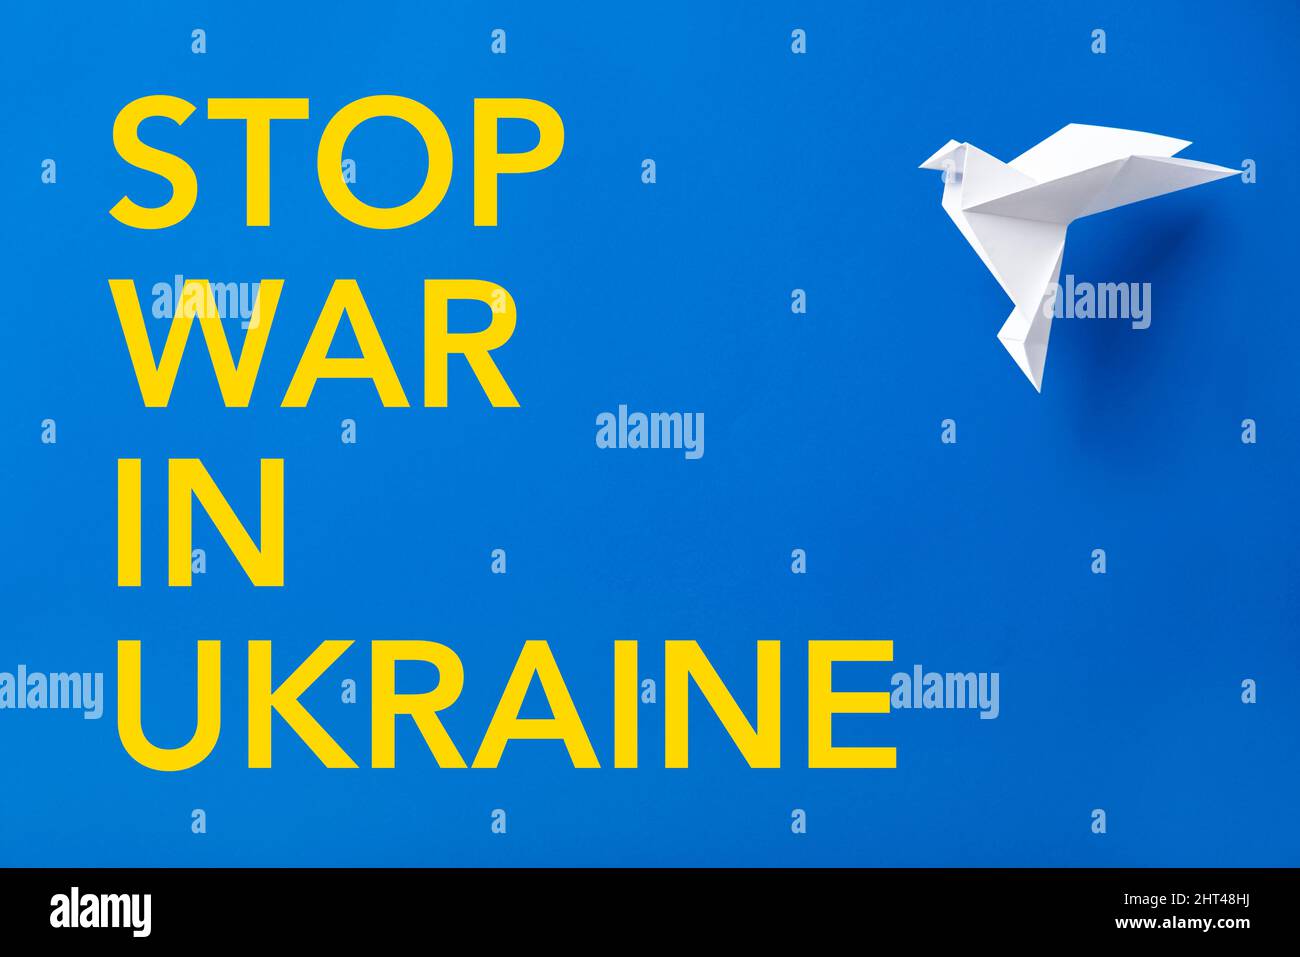 Text Stop war in Ukraine in yellow letters on a blue background, colors of the Ukrainian flag, next to a white origami paper dove, symbol of peace. Stock Photo